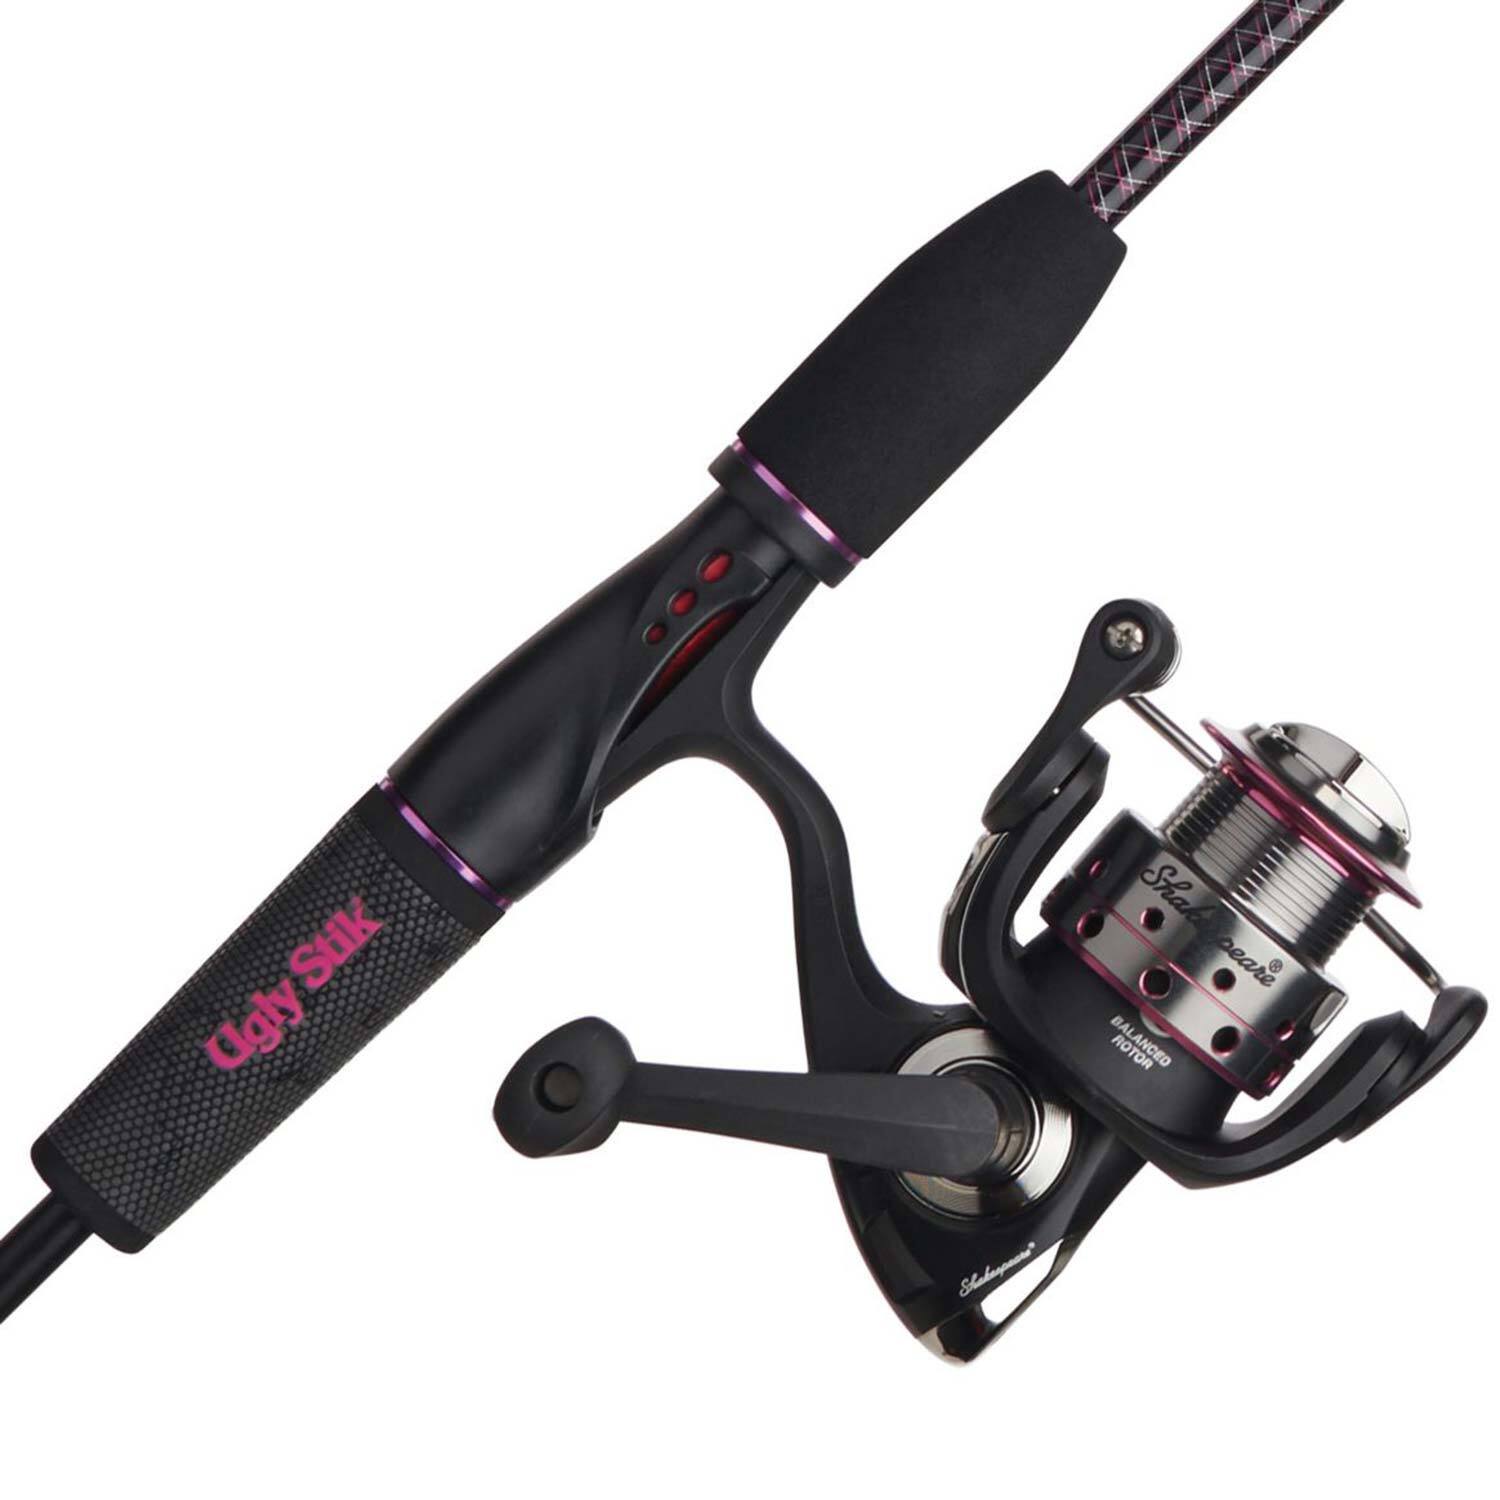 Ugly Stik 6’ GX2 Ladies' Spinning Fishing Rod and Reel Spinning Combo